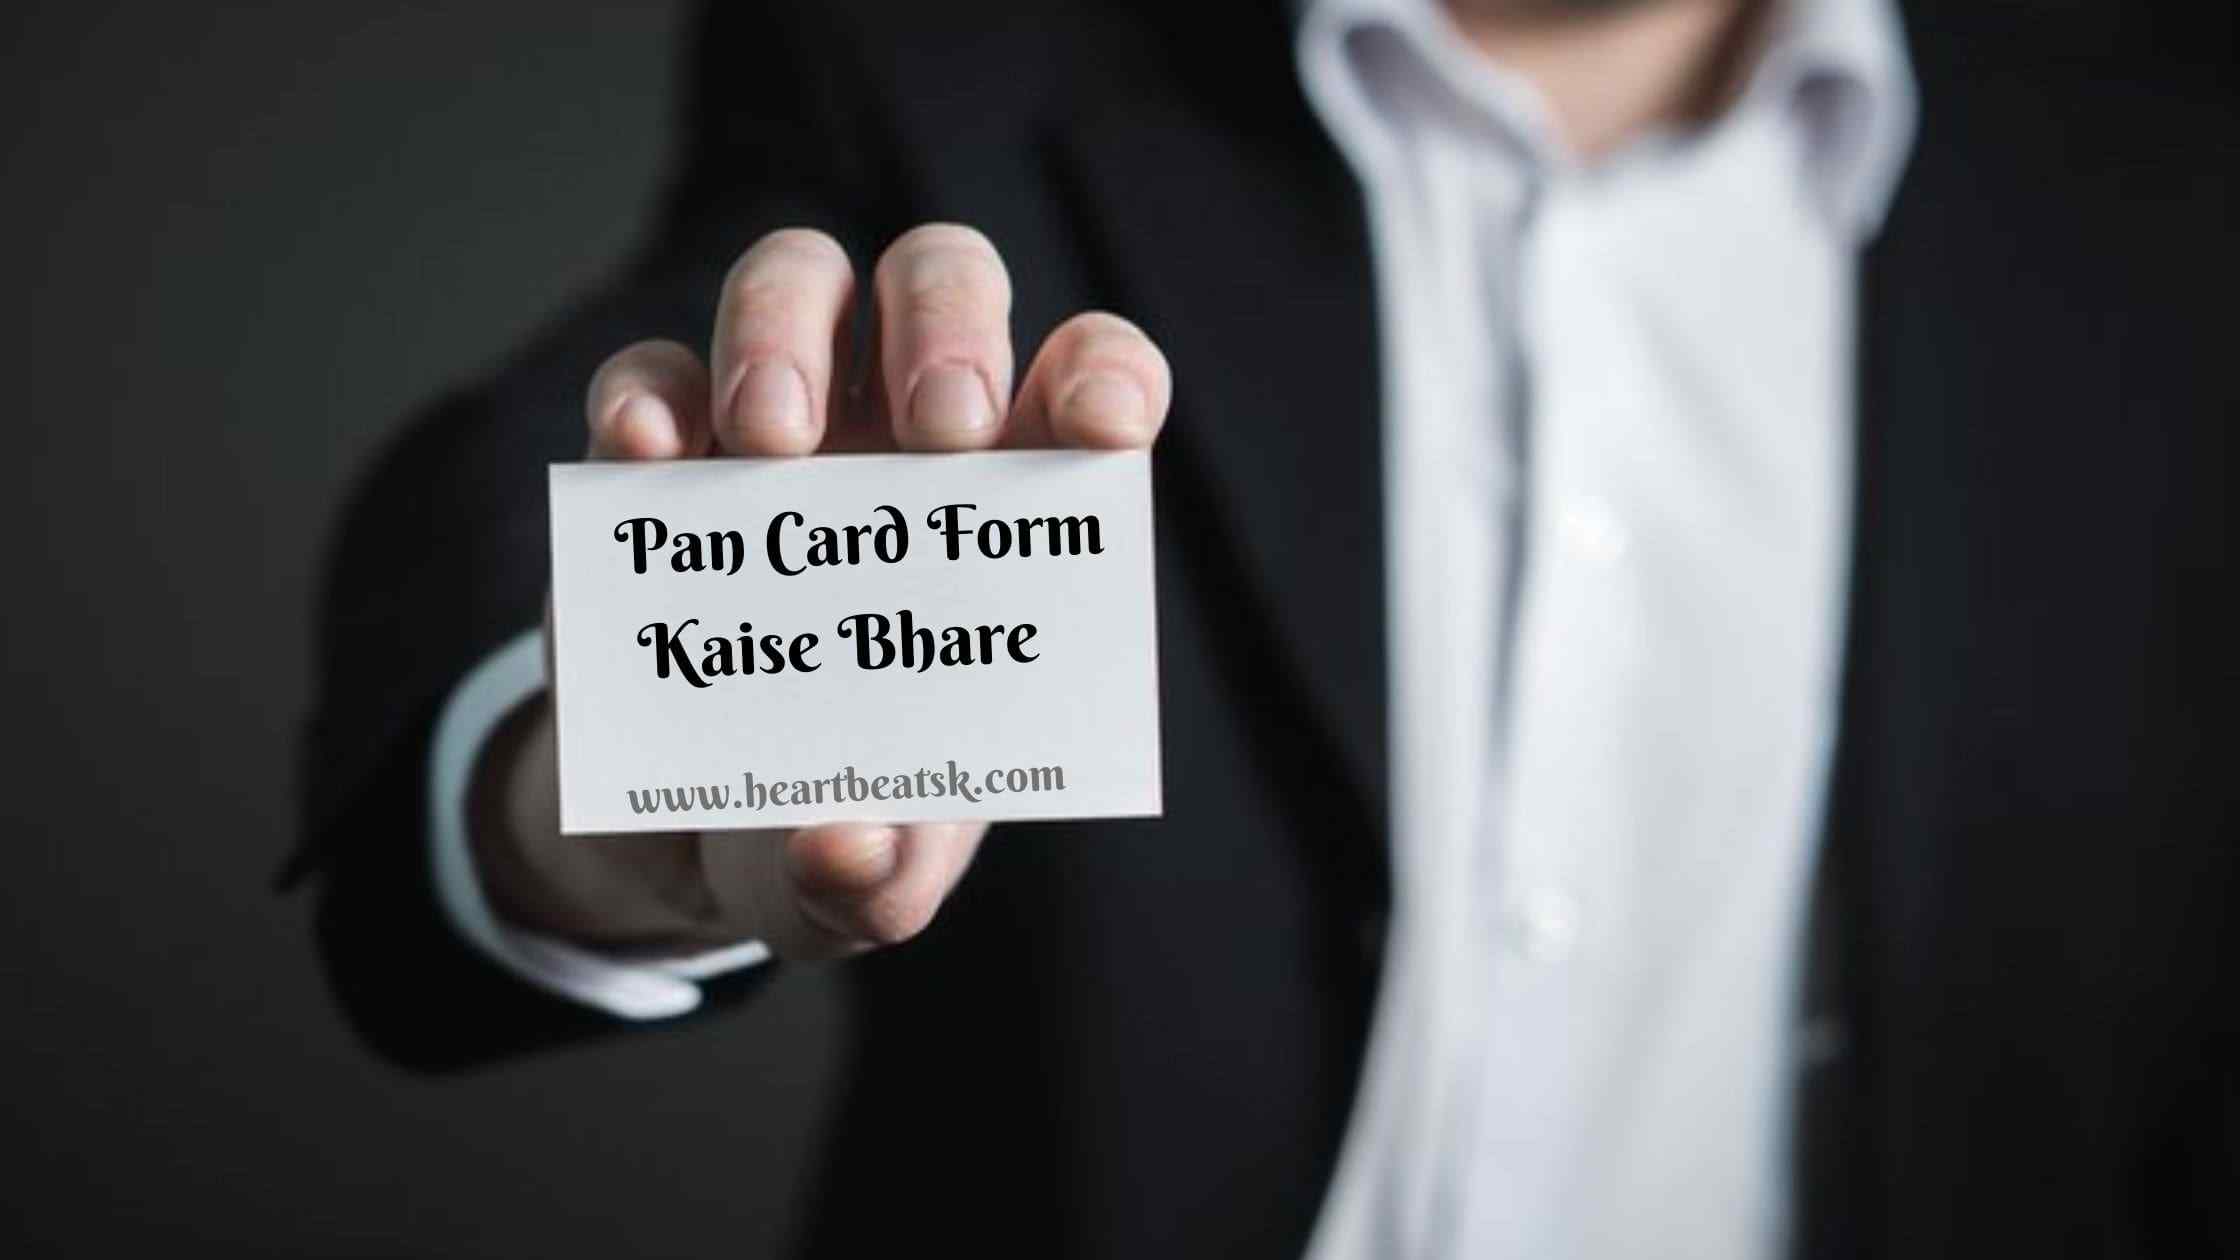 Pan Card Form Kaise Bhare How To Fill Pan Card Form In Hindi 